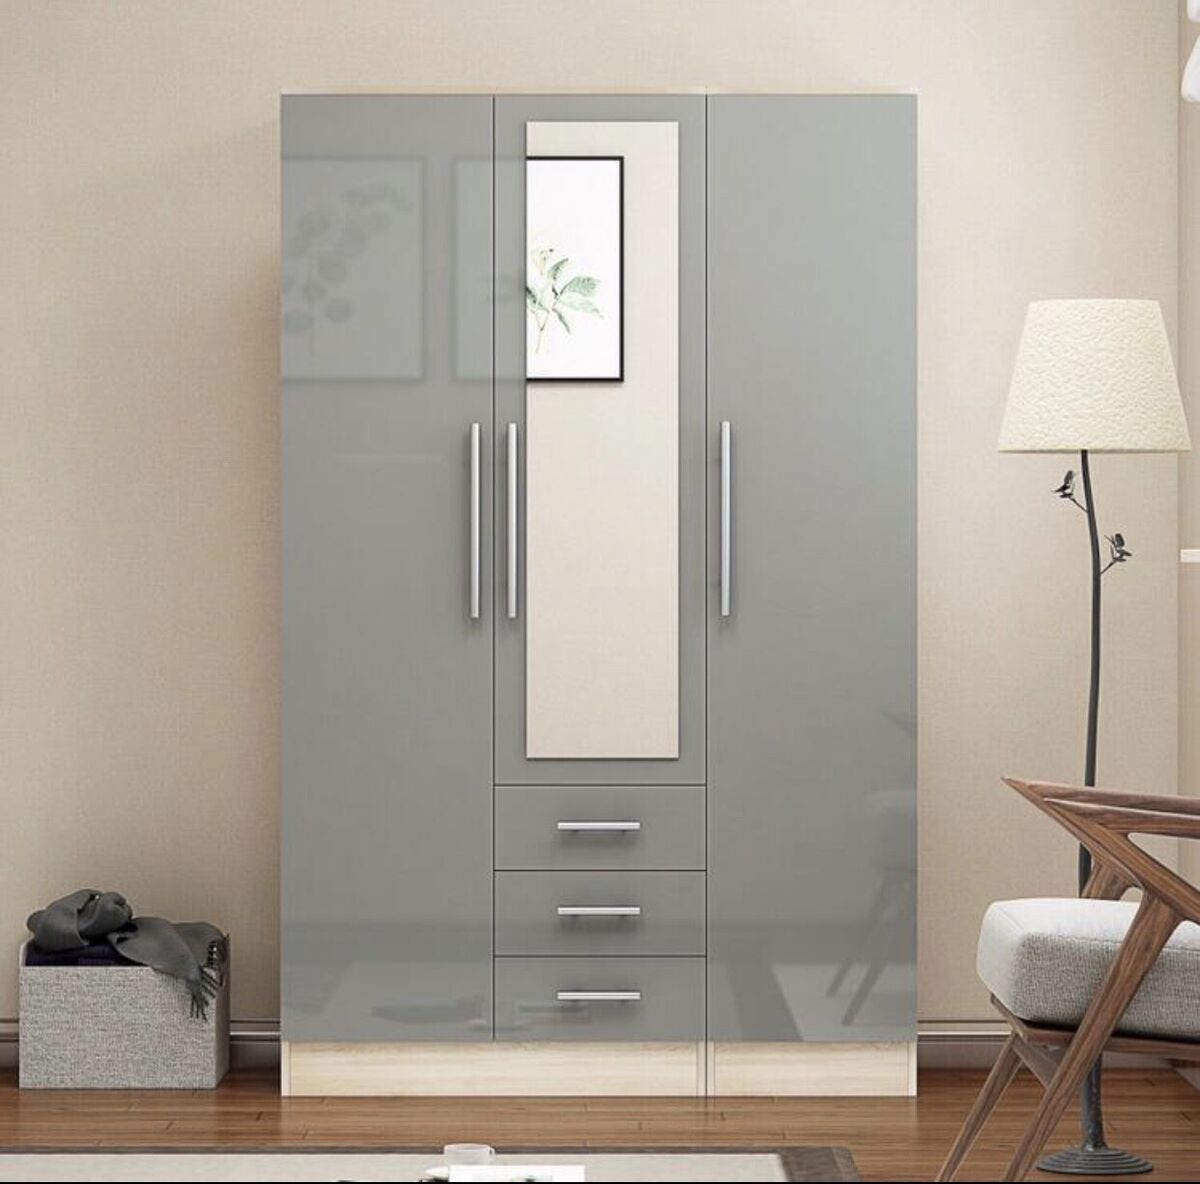 Unique 3 Door Combi Mirrored Wardrobe, 3 Drawers, In High Gloss  Grey/black/white | Ebay Throughout Three Door Mirrored Wardrobes (View 9 of 15)